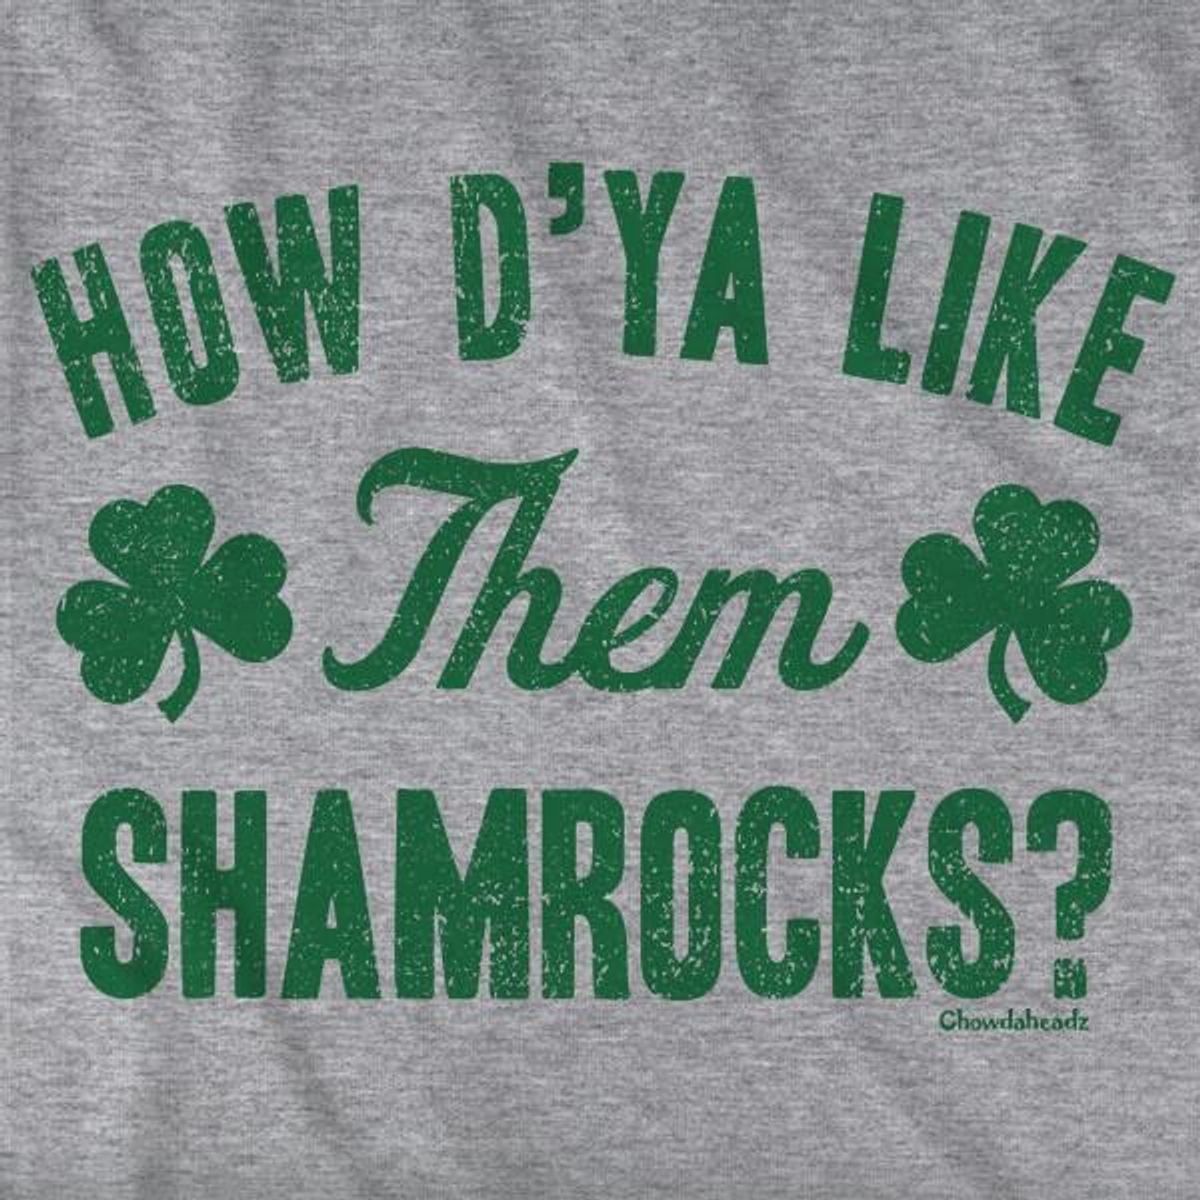 Shake Your Shamrocks? How About No